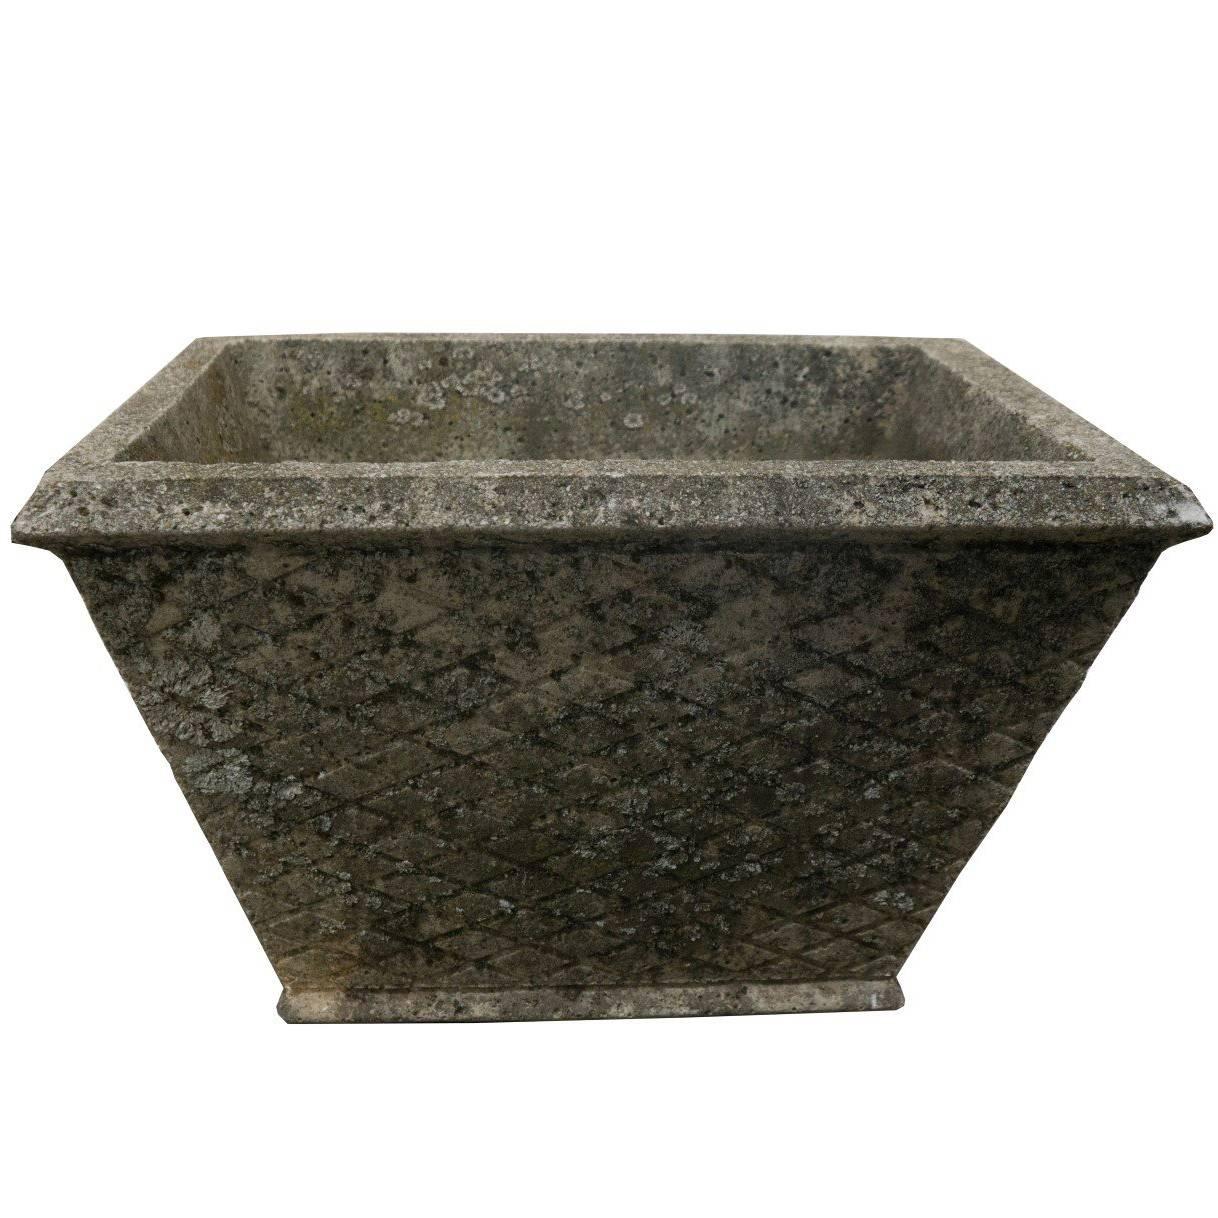 20th Century French Cast Stone Planter with Intricate Basket Weave Design